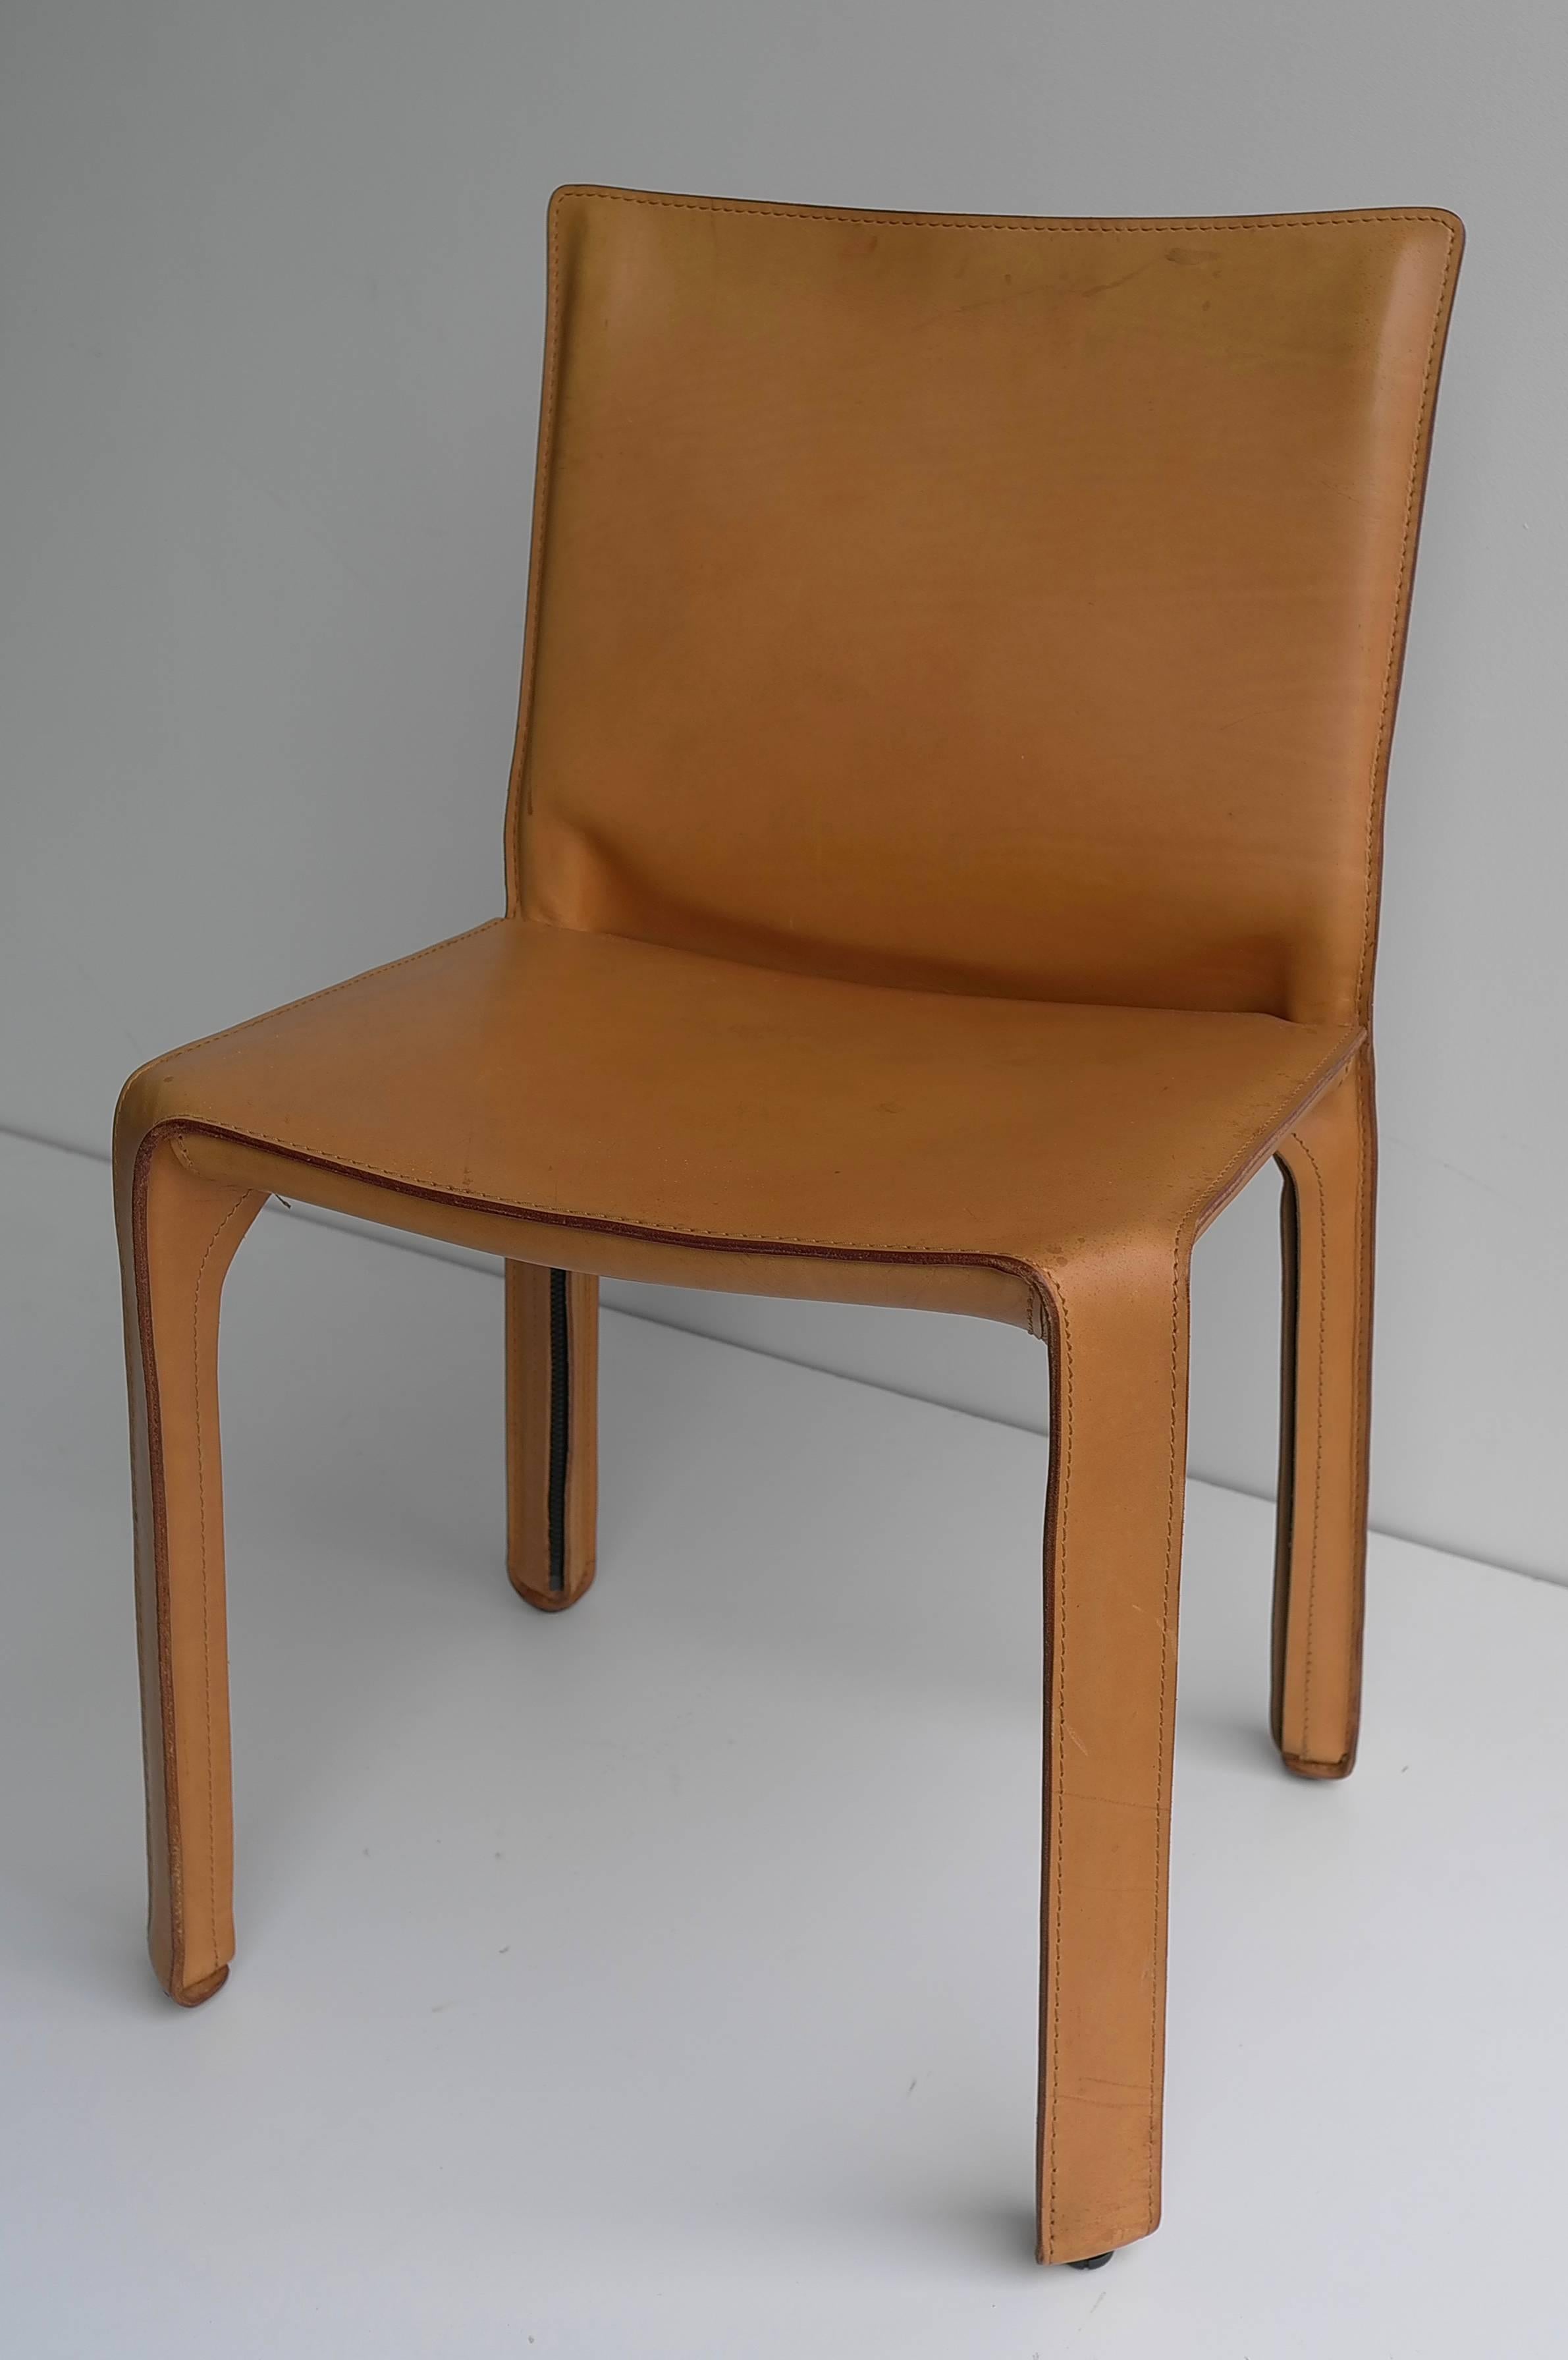 Cassina cab chair in cognac leather.

Chair with enamelled steel frame. The seat is padded with polyurethane foam. Leather upholstery zippered over the frame, in cognac leather.